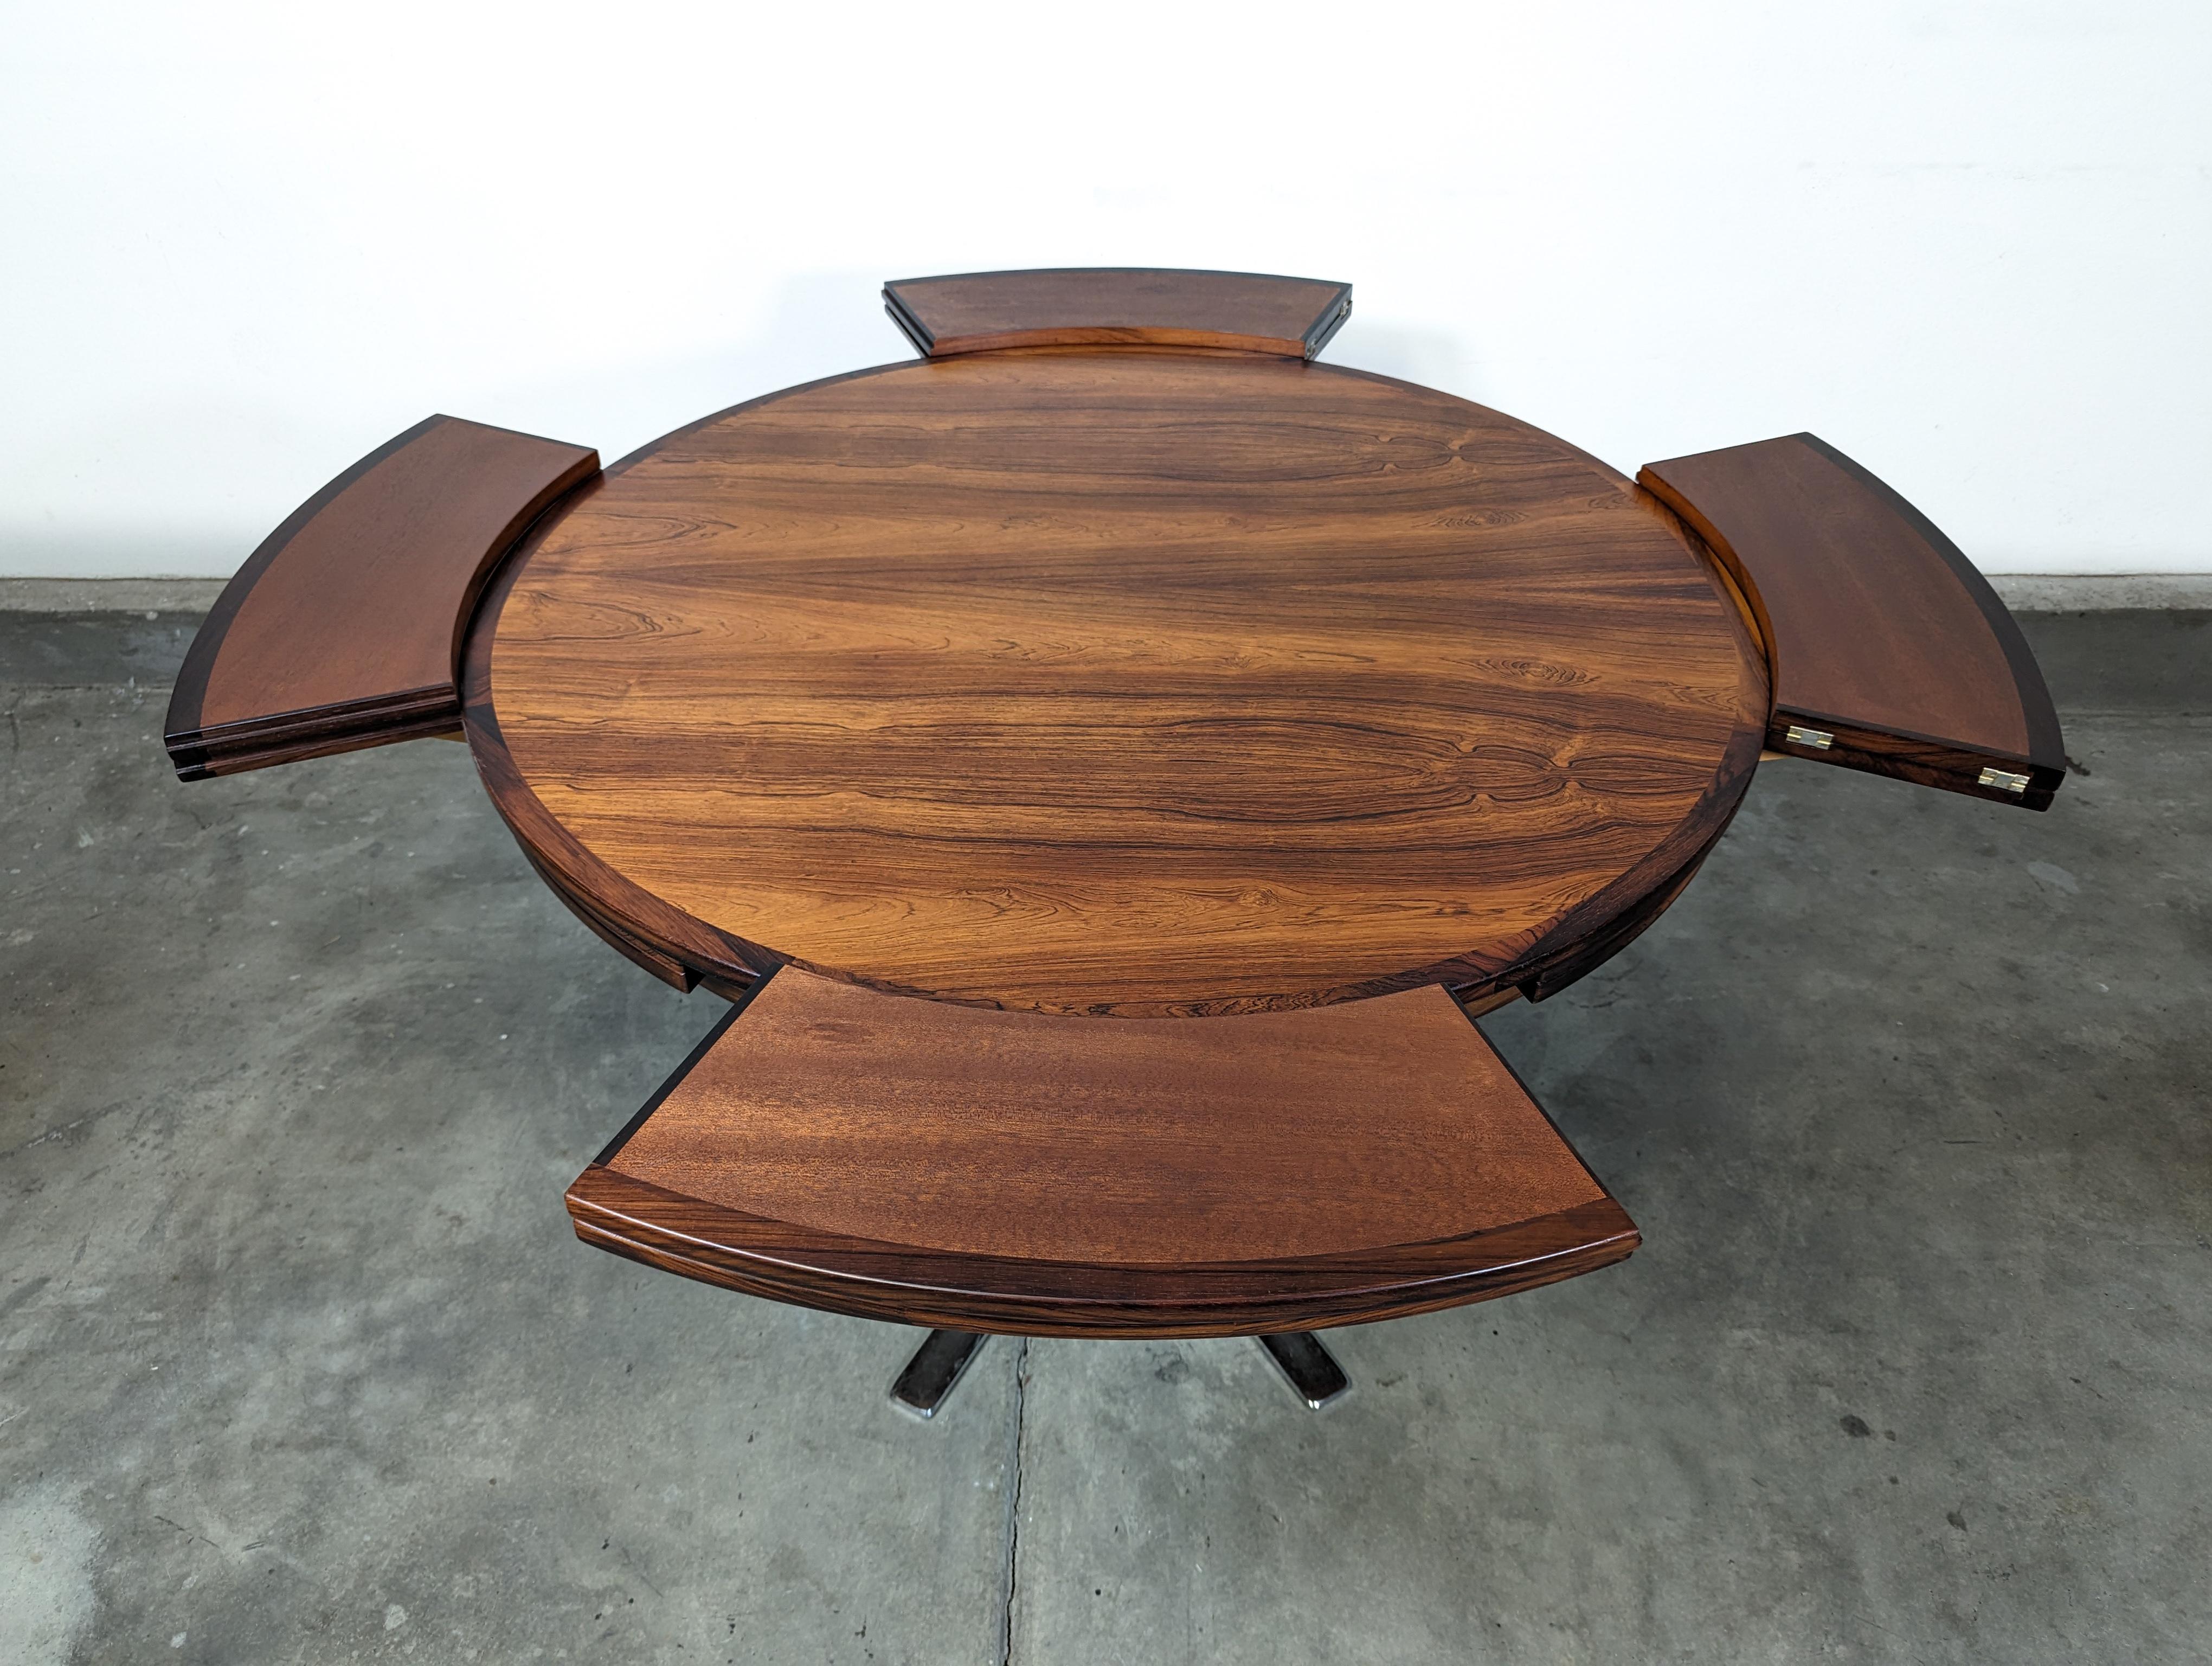 Danish Mid Century Rosewood Flip Flap Circular Dining Table by Dyrlund, c1960s For Sale 4